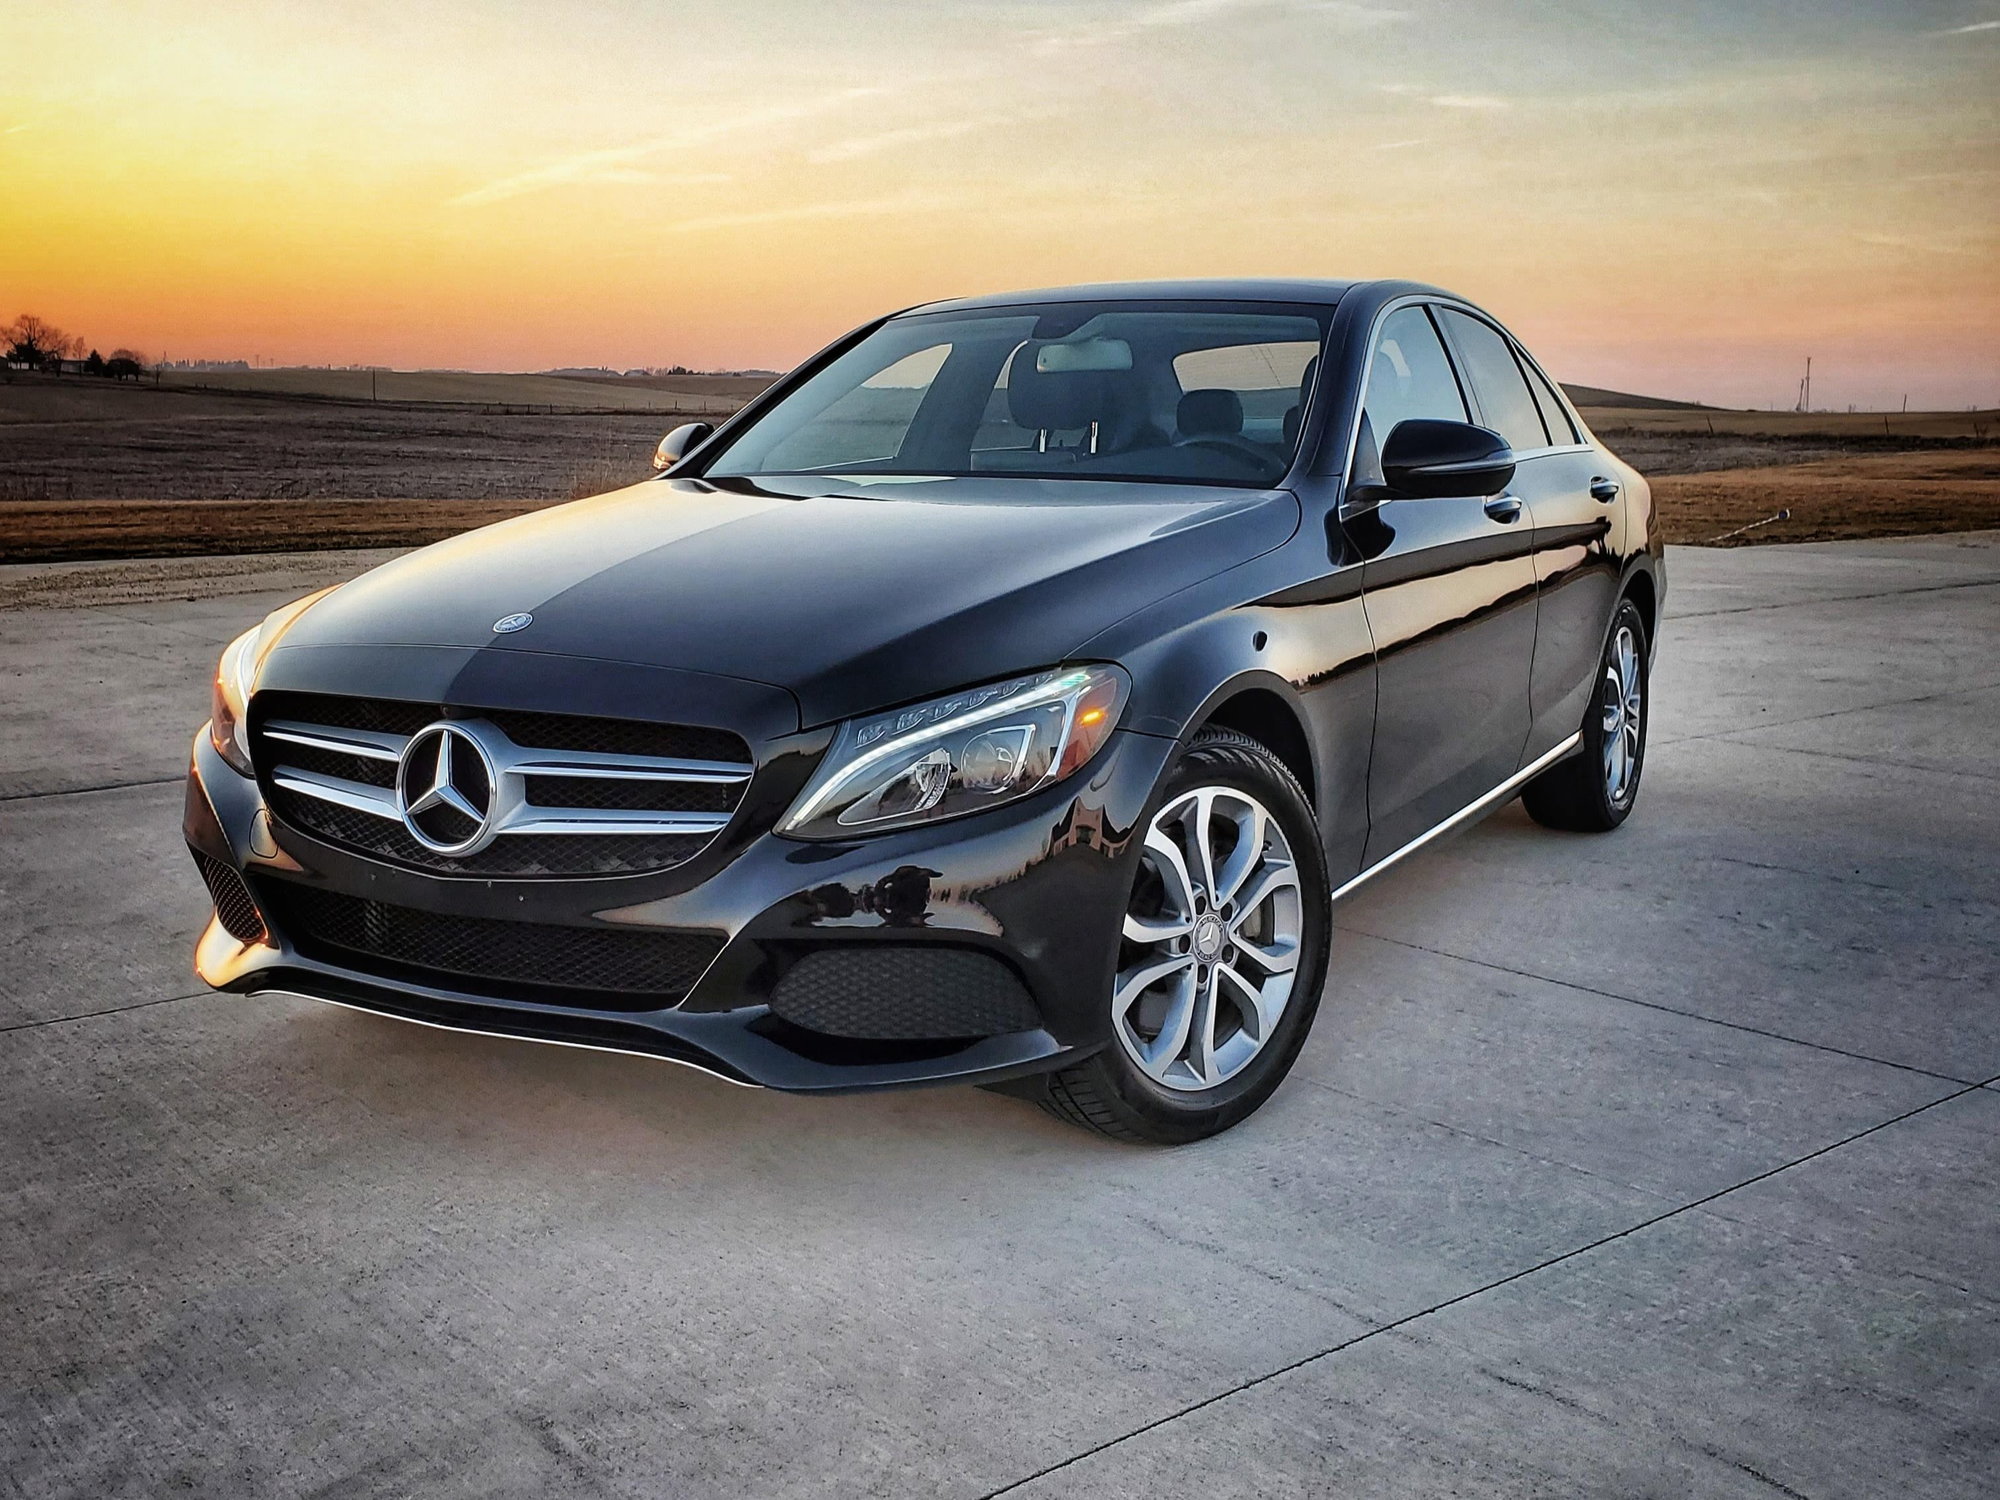 Mercedes Benz C300 4Matic 2016 - Certified Pre-Owned 2016 Mercedes-Benz ...